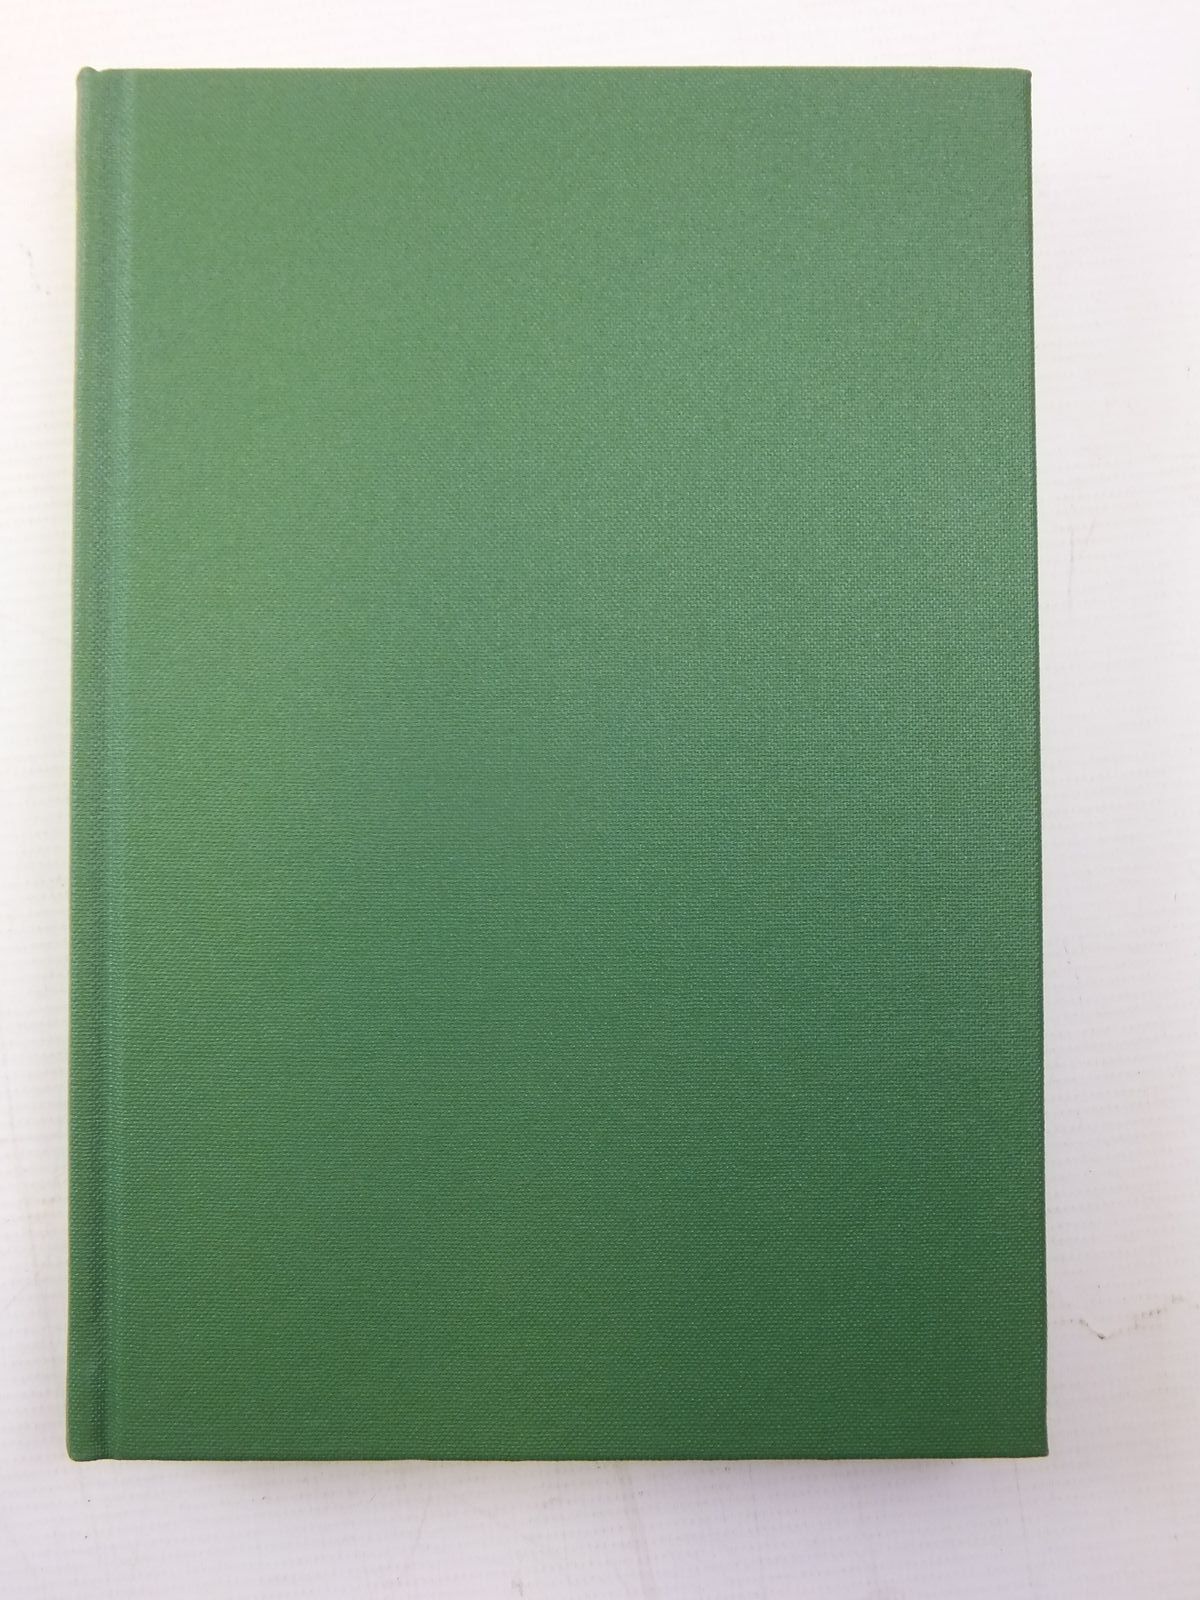 Photo of PLANT DISEASE A NATURAL HISTORY (NN 85) written by Ingram, David
Robertson, Noel published by Harper Collins (STOCK CODE: 2116240)  for sale by Stella & Rose's Books